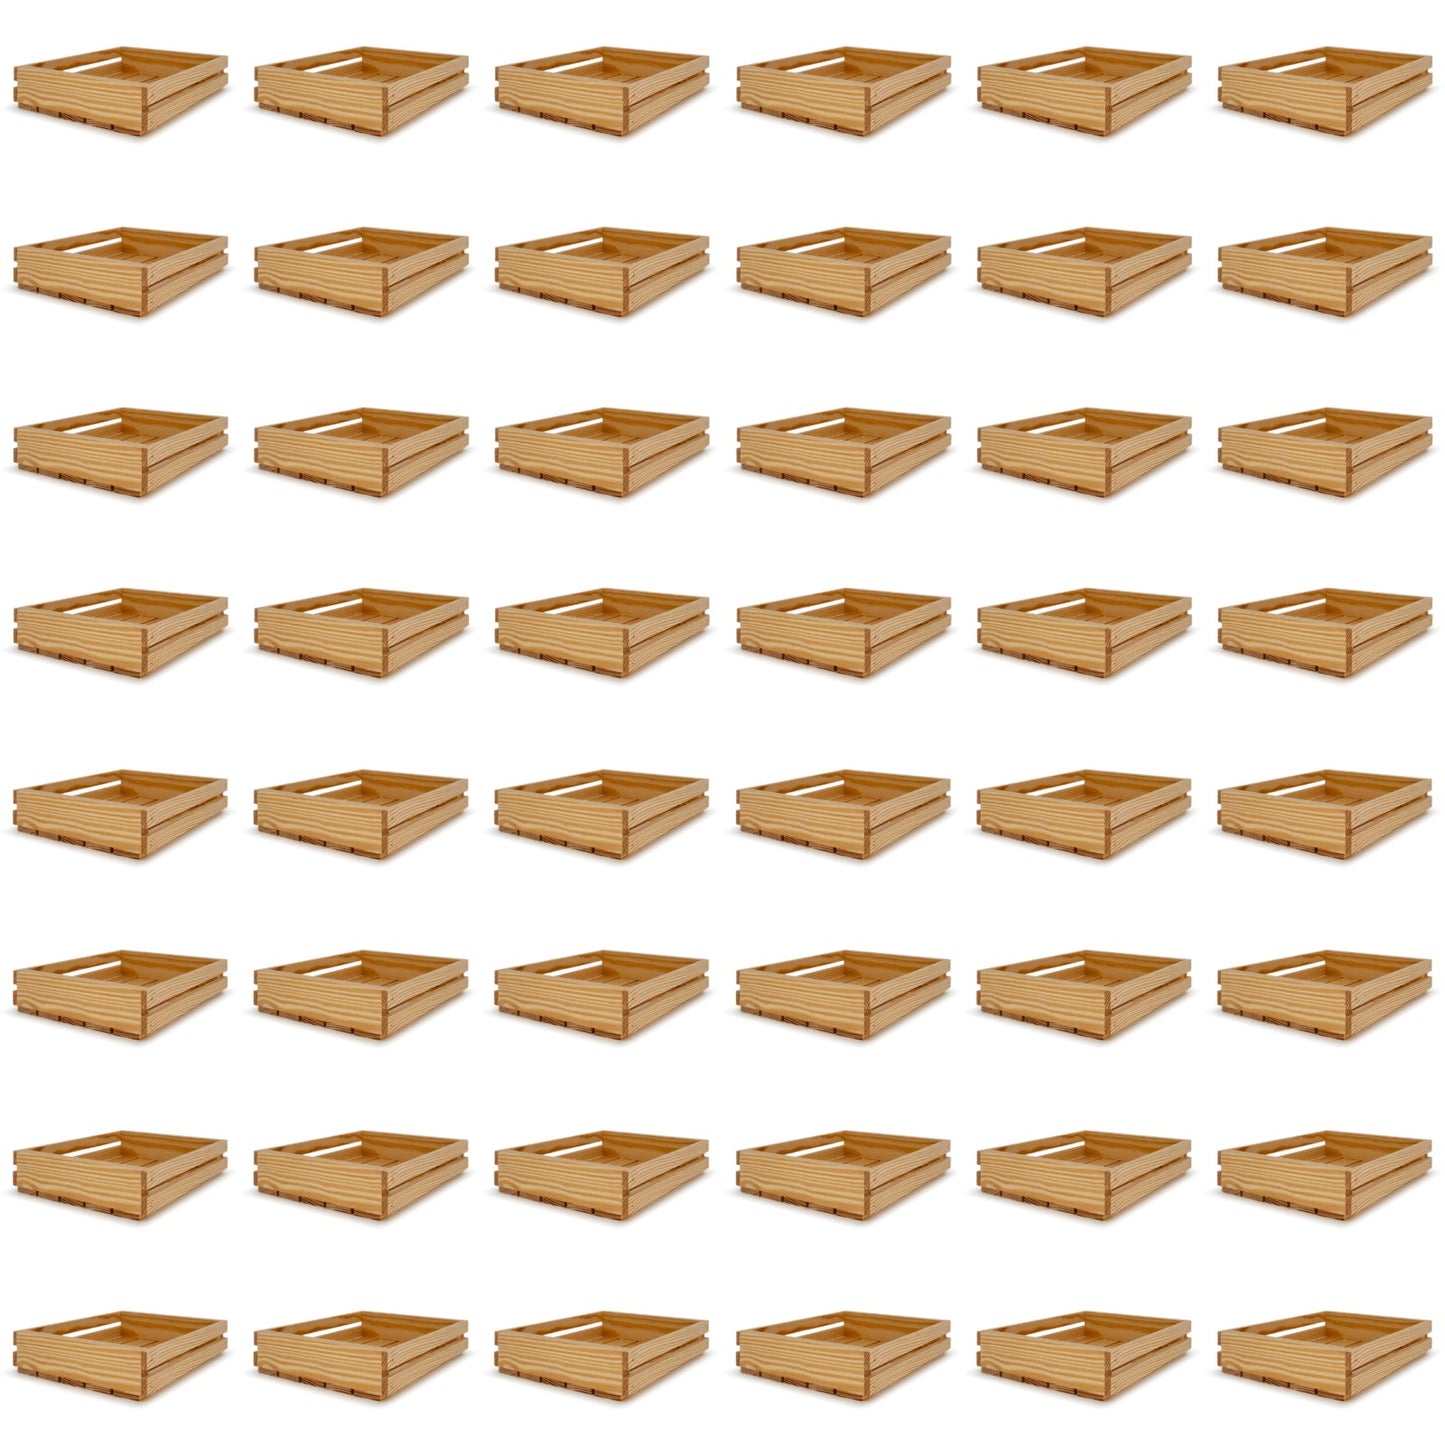 48 Small wooden crates 12x10x2.5